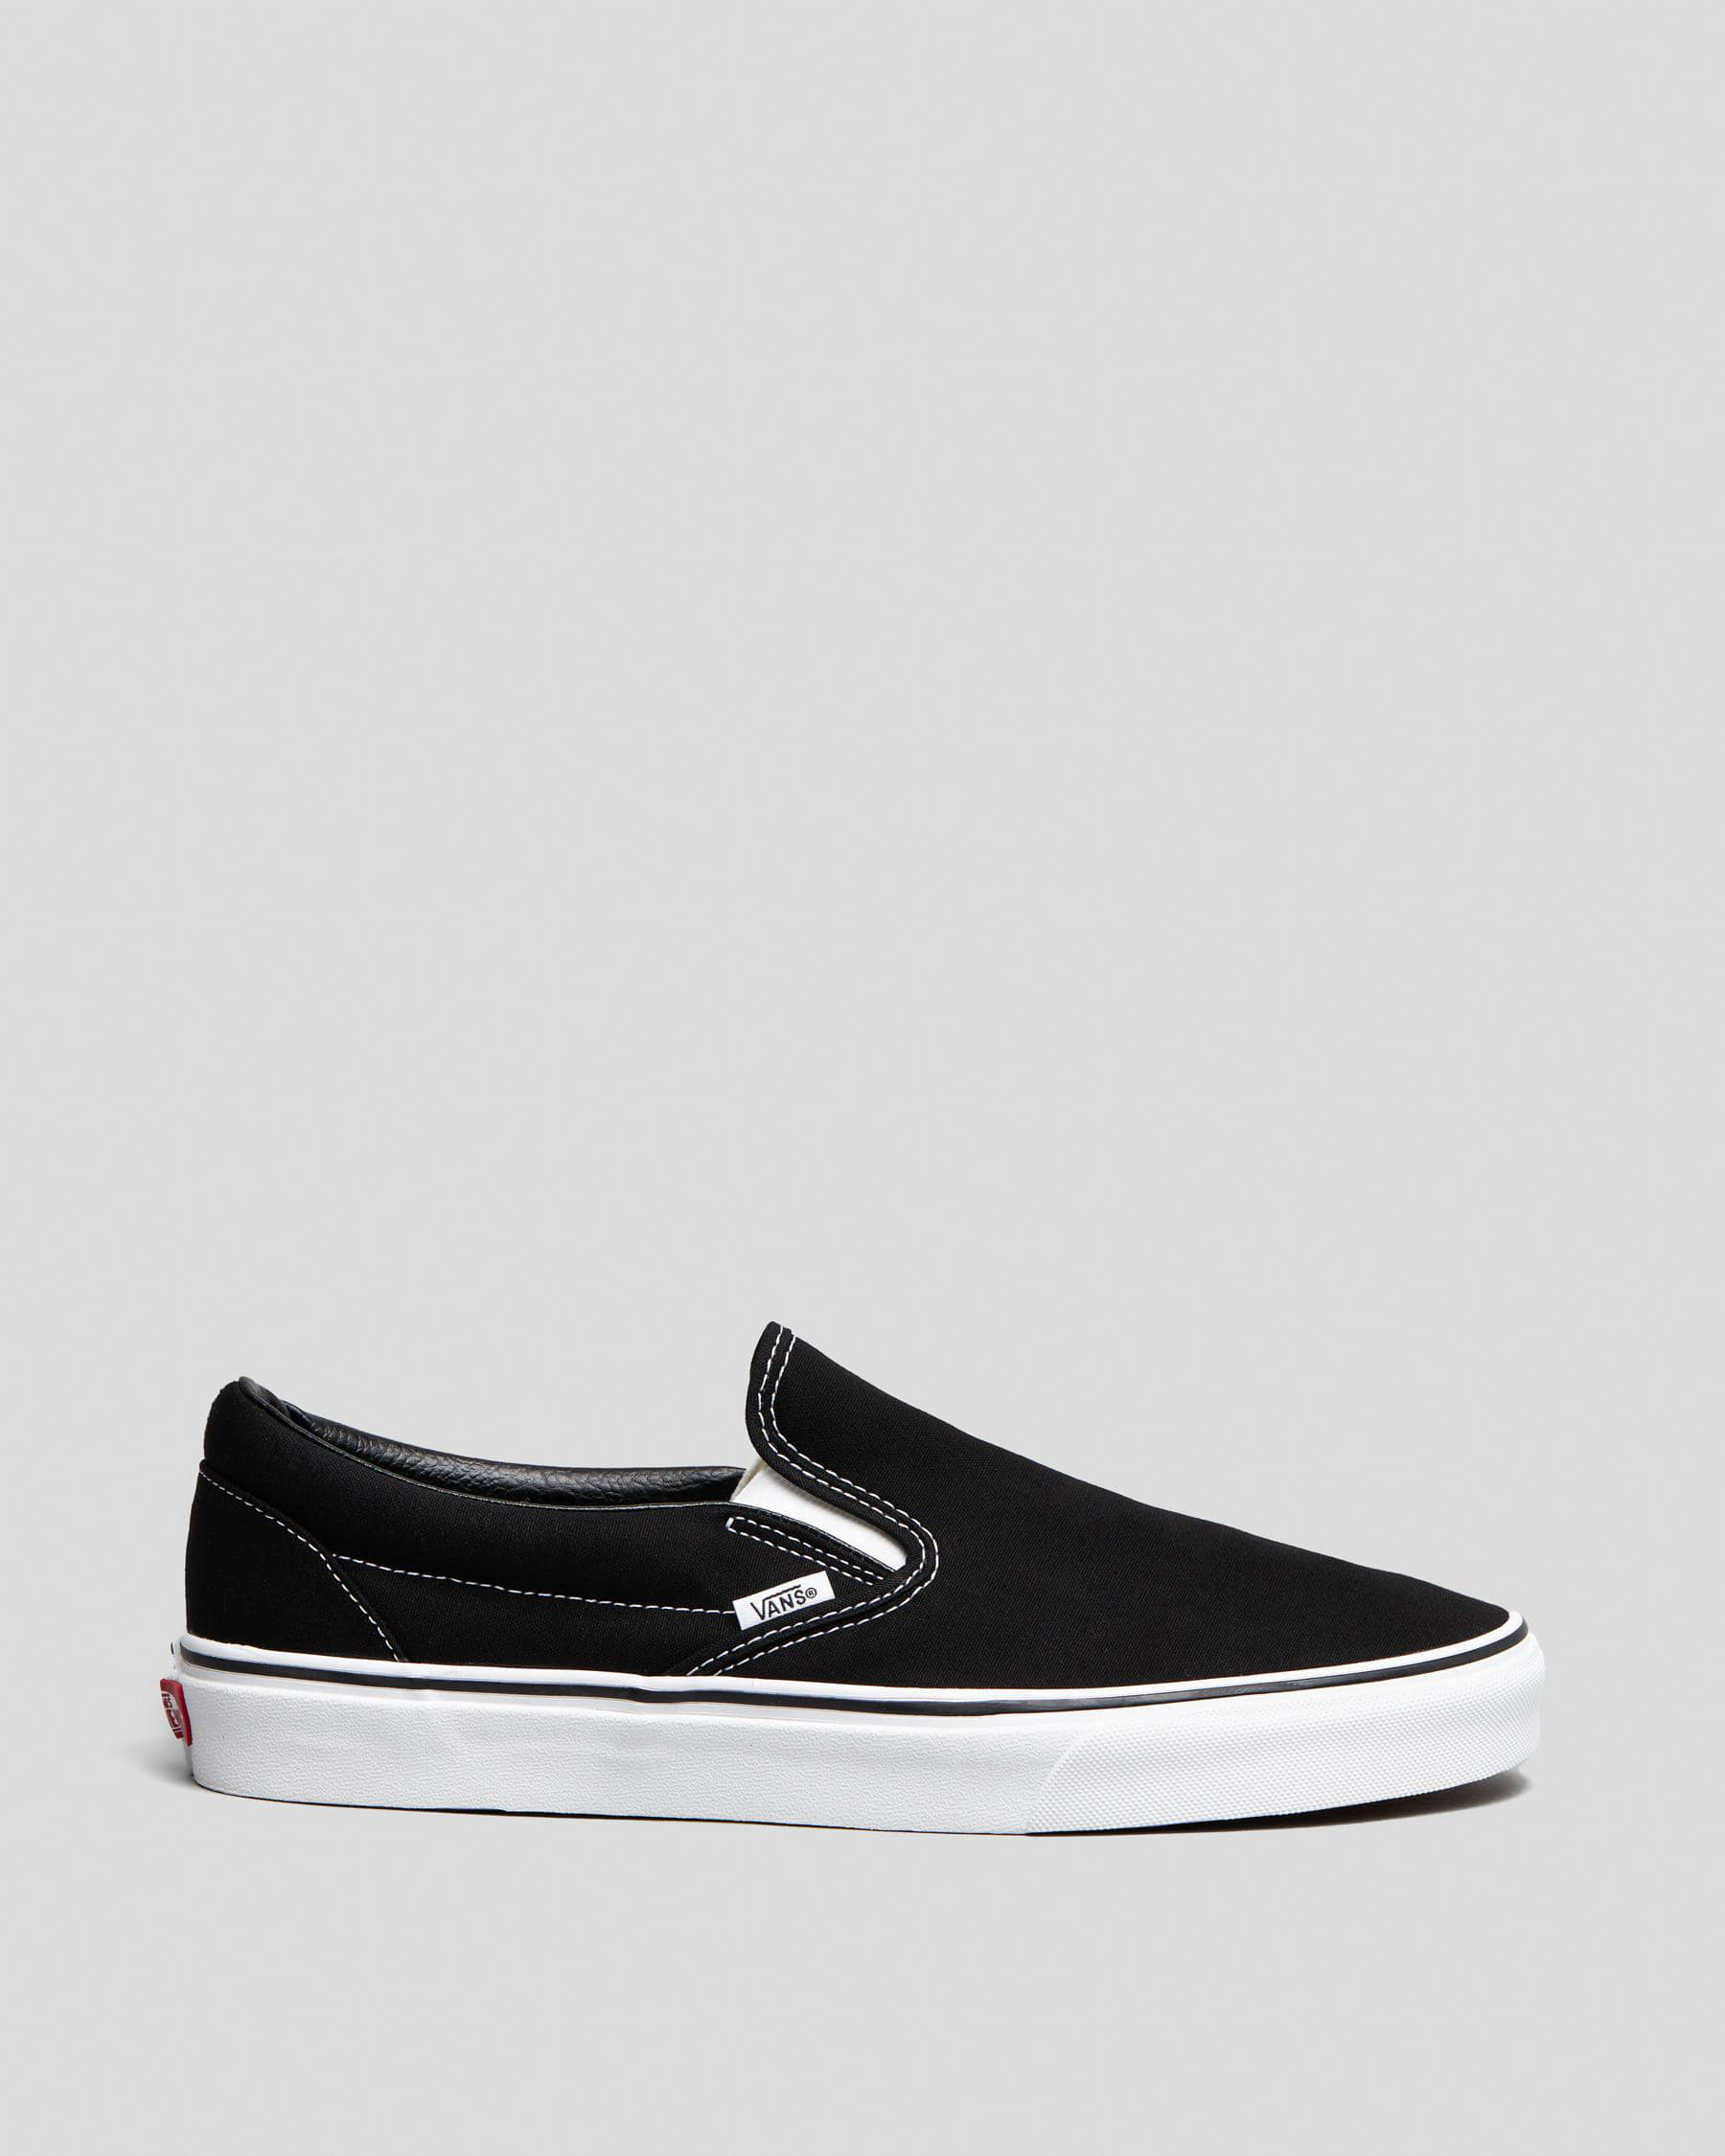 Shop Vans Mens' CSO Slip-On Shoes In Black - Fast Shipping & Easy ...